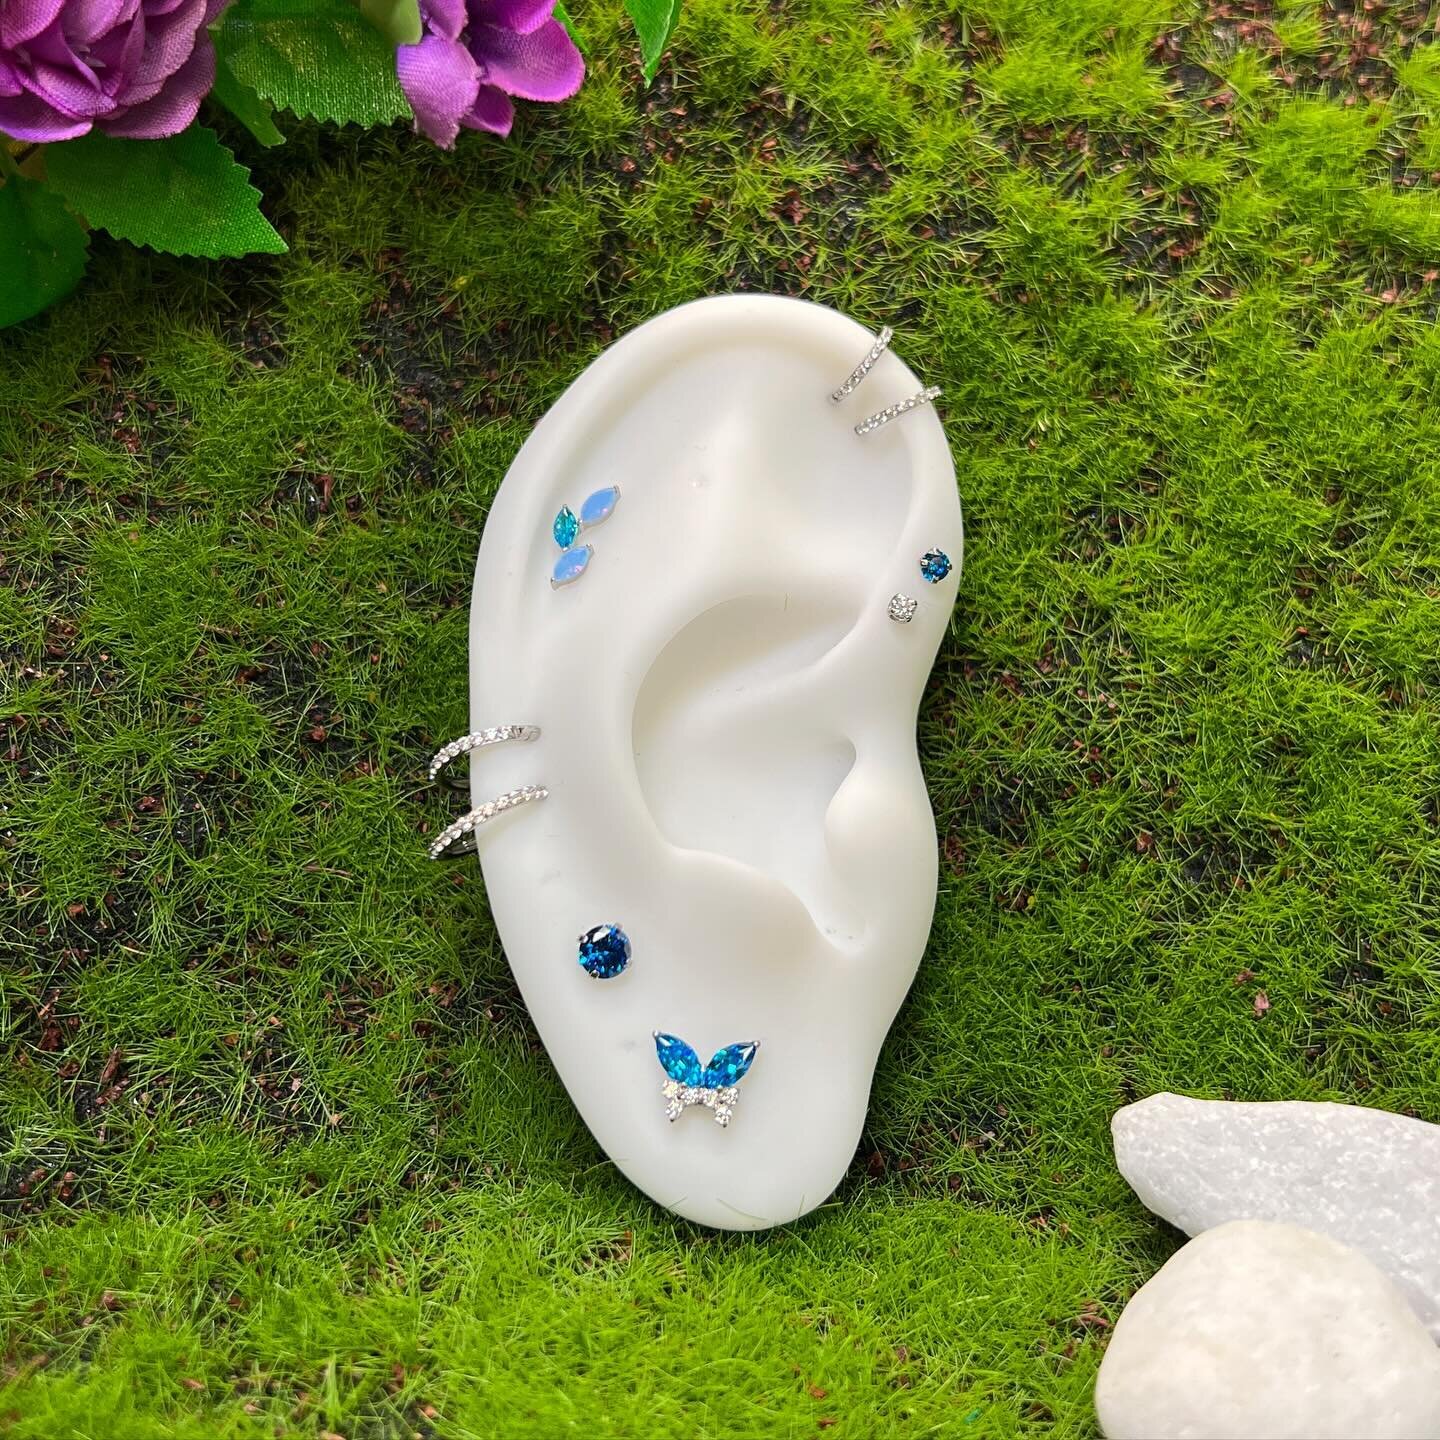 In honour of the first week of spring! 🦋🐝🌷 (Hopefully it starts feeling like it soon)
Titanium &amp; 14KT pieces available for curations ✨
.
.
.
#spring #springpiercings #butterfly #bumblebee #piercingjewelry #springtime #gta #bodymods #piercingti